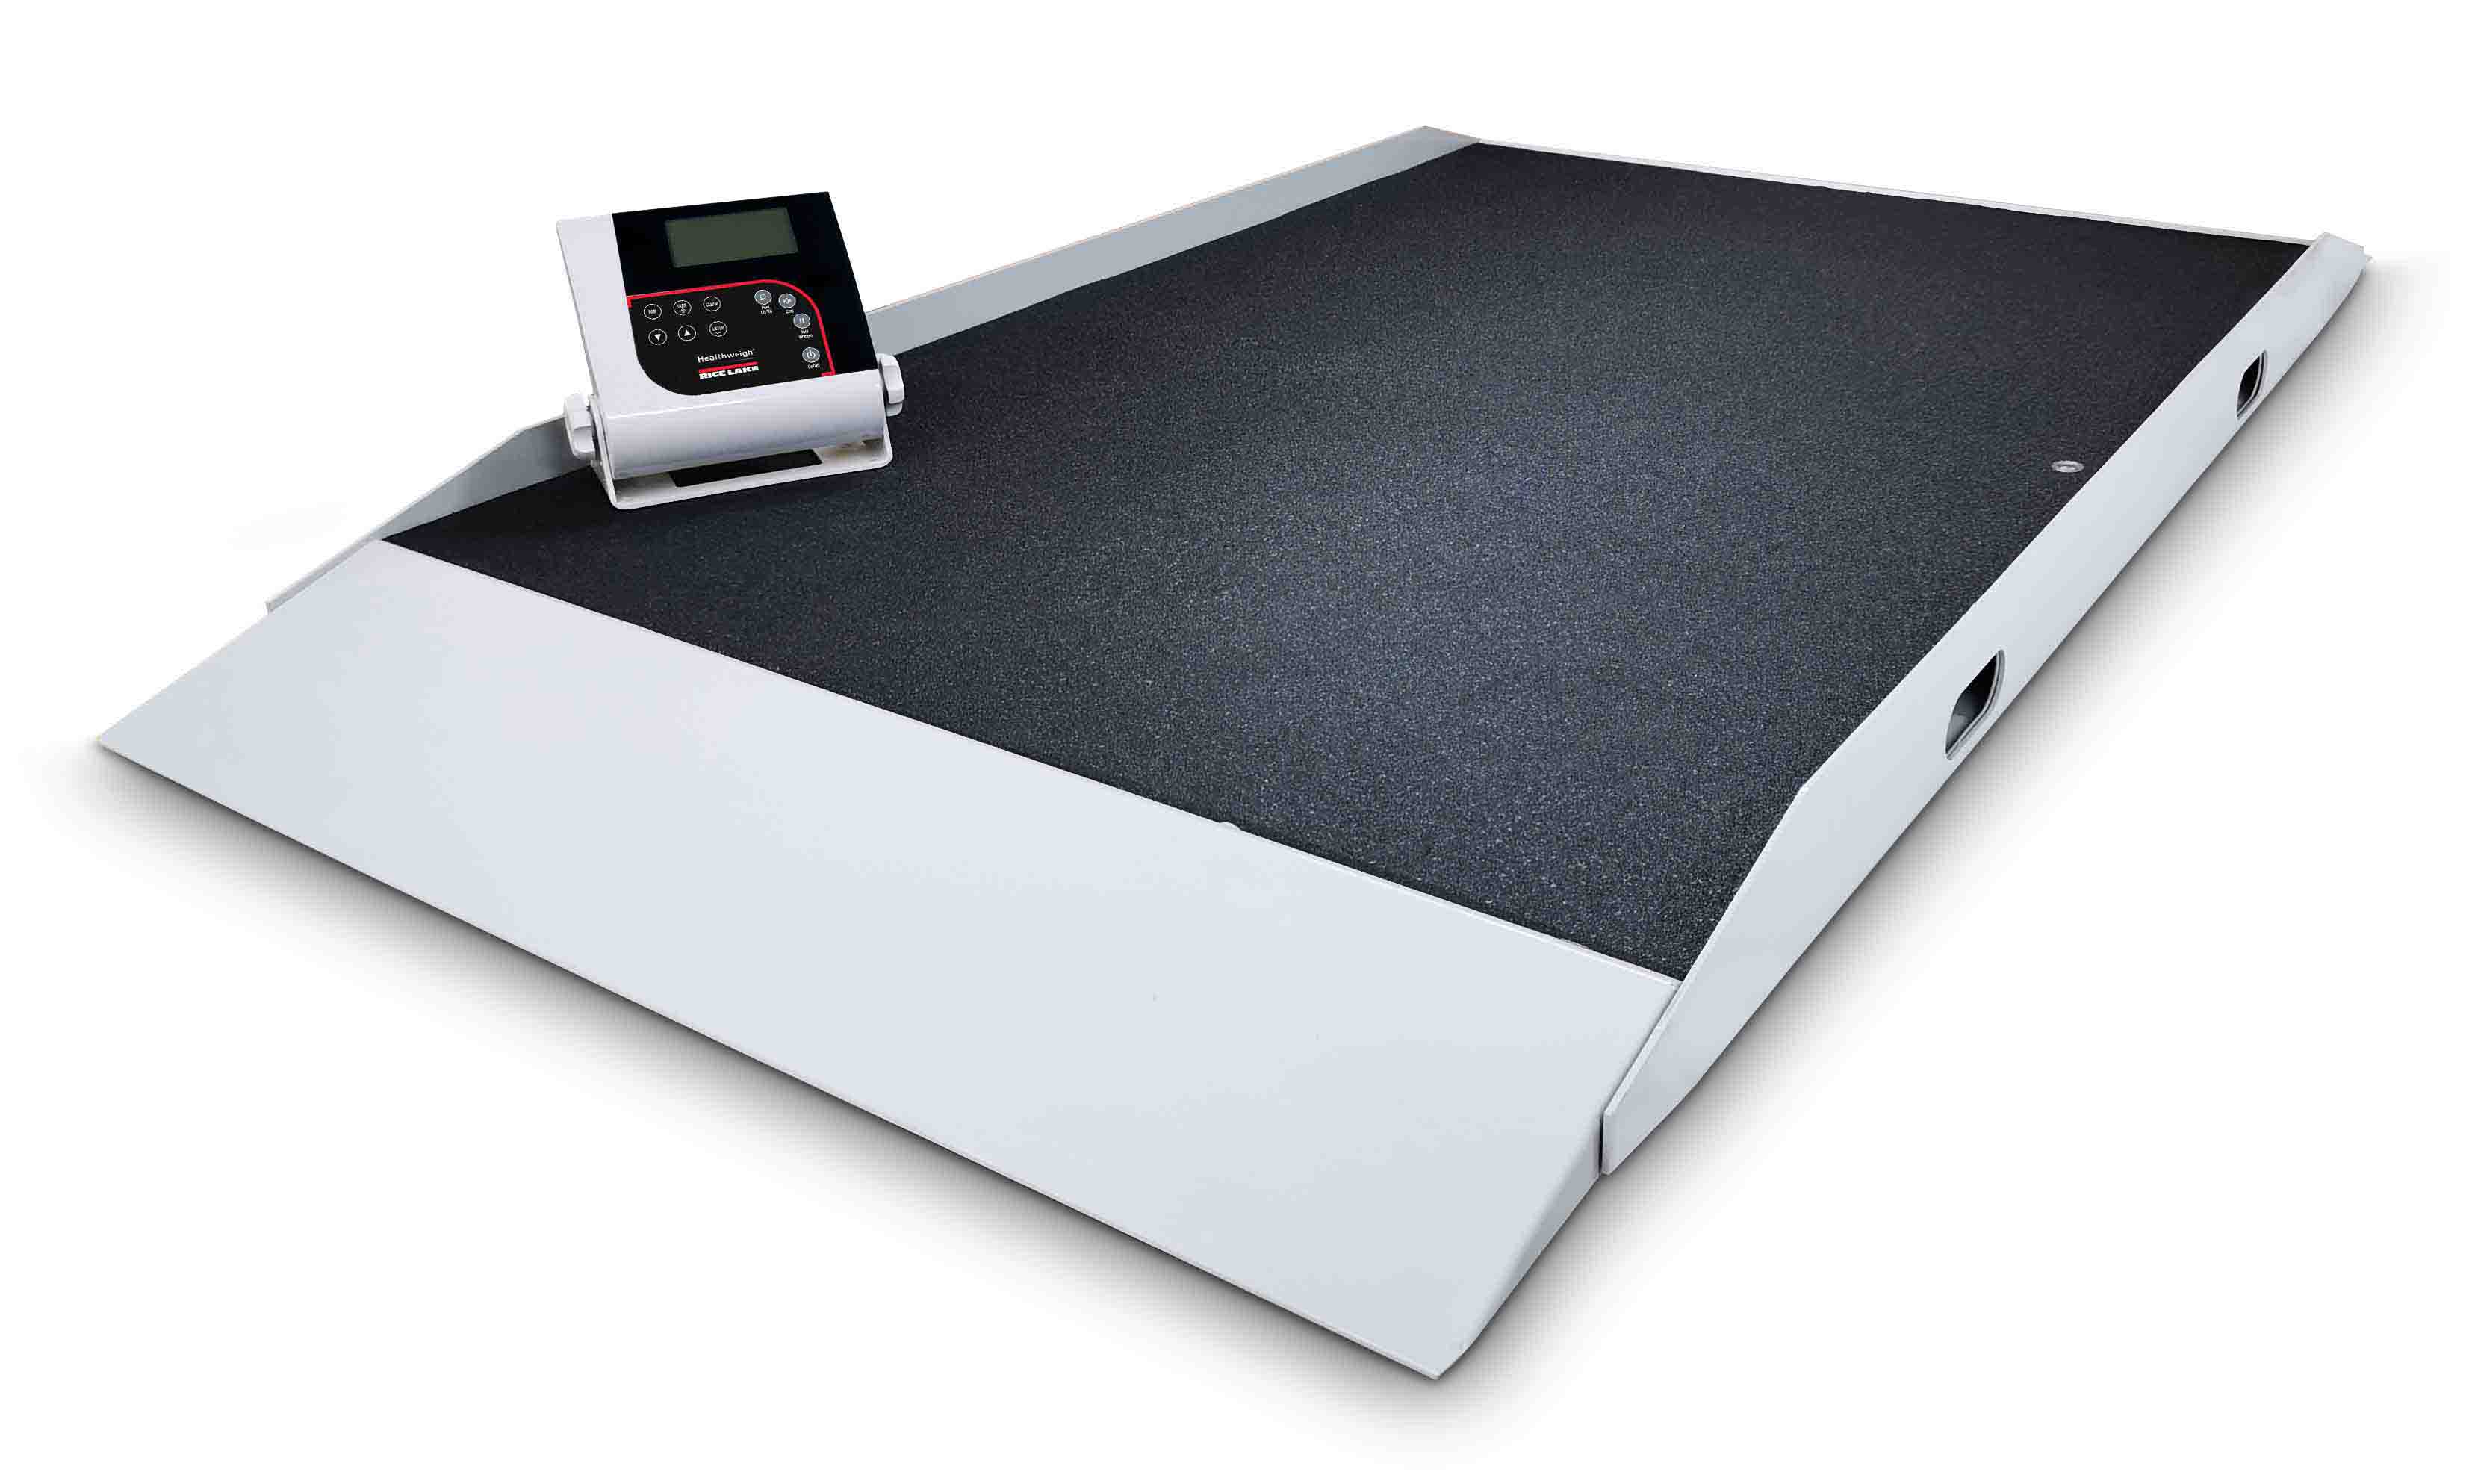 Rice Lake 203622 1000lb x 0.2lb, 350-10-8S Digital Stretcher Scale with 2 years Warranty